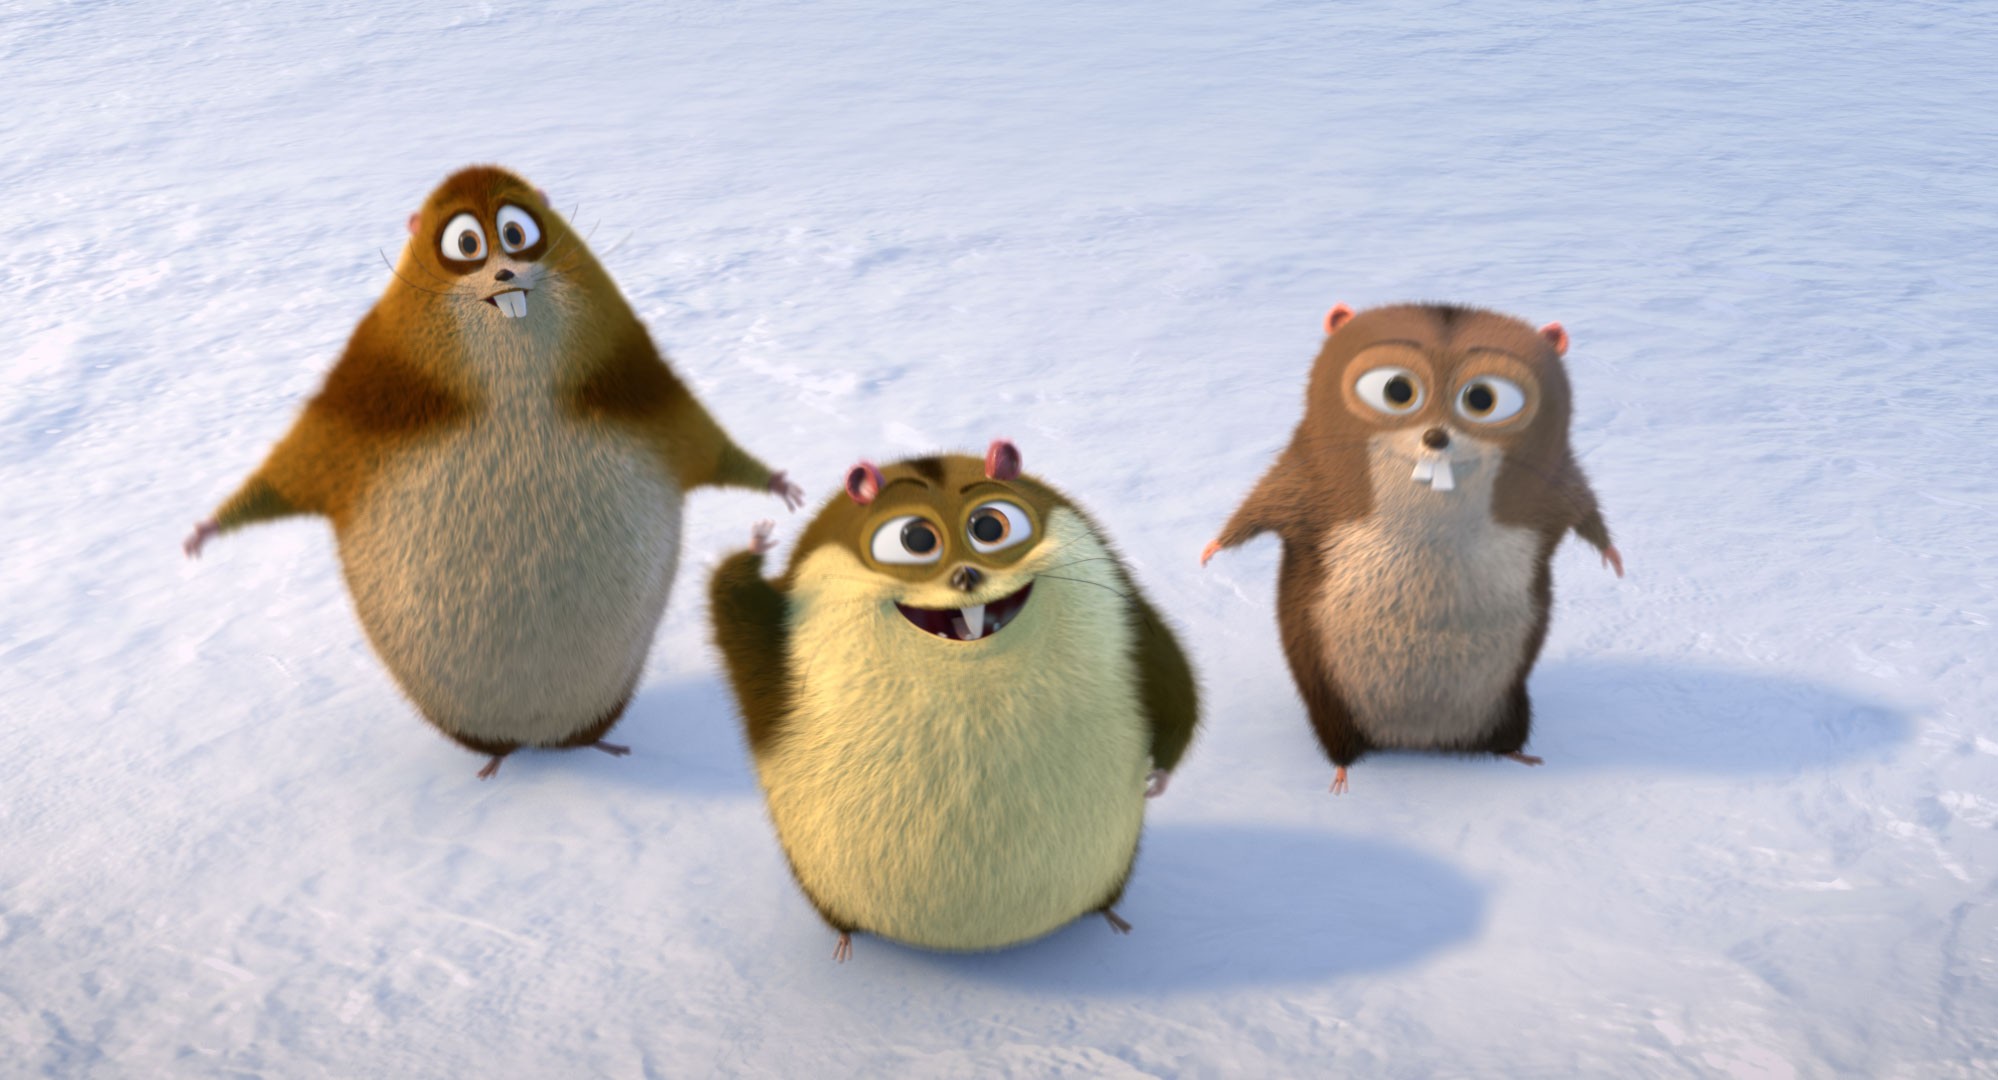 The Lemmings from Lionsgate Films' Norm of the North (2016)